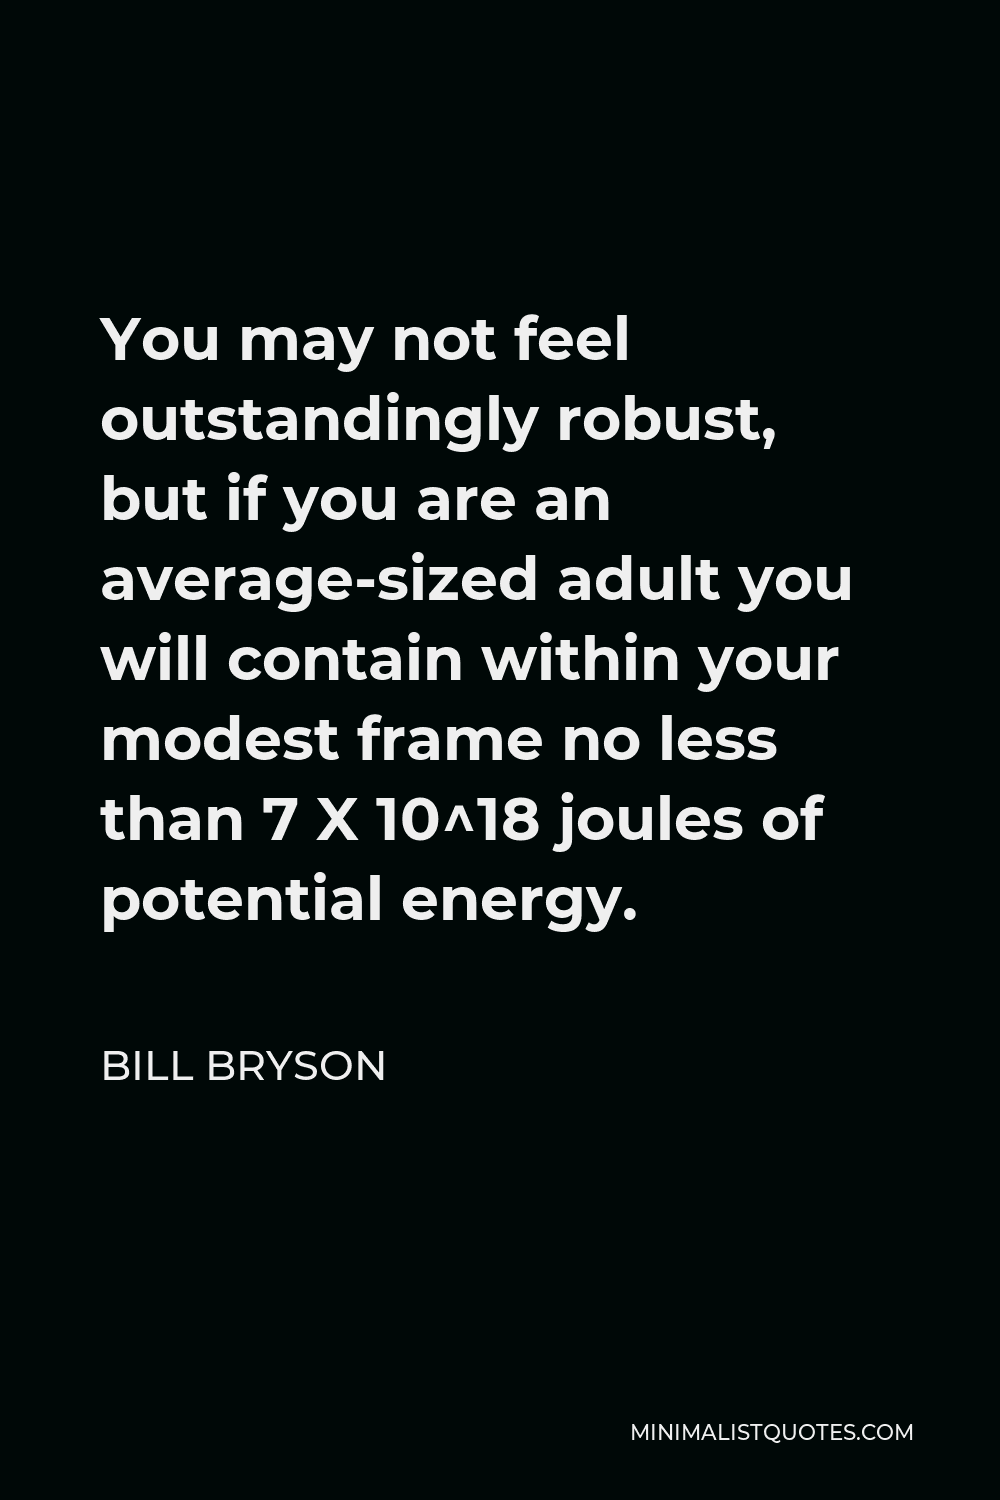 Bill Bryson Quote - You may not feel outstandingly robust, but if you are an average-sized adult you will contain within your modest frame no less than 7 X 10^18 joules of potential energy.